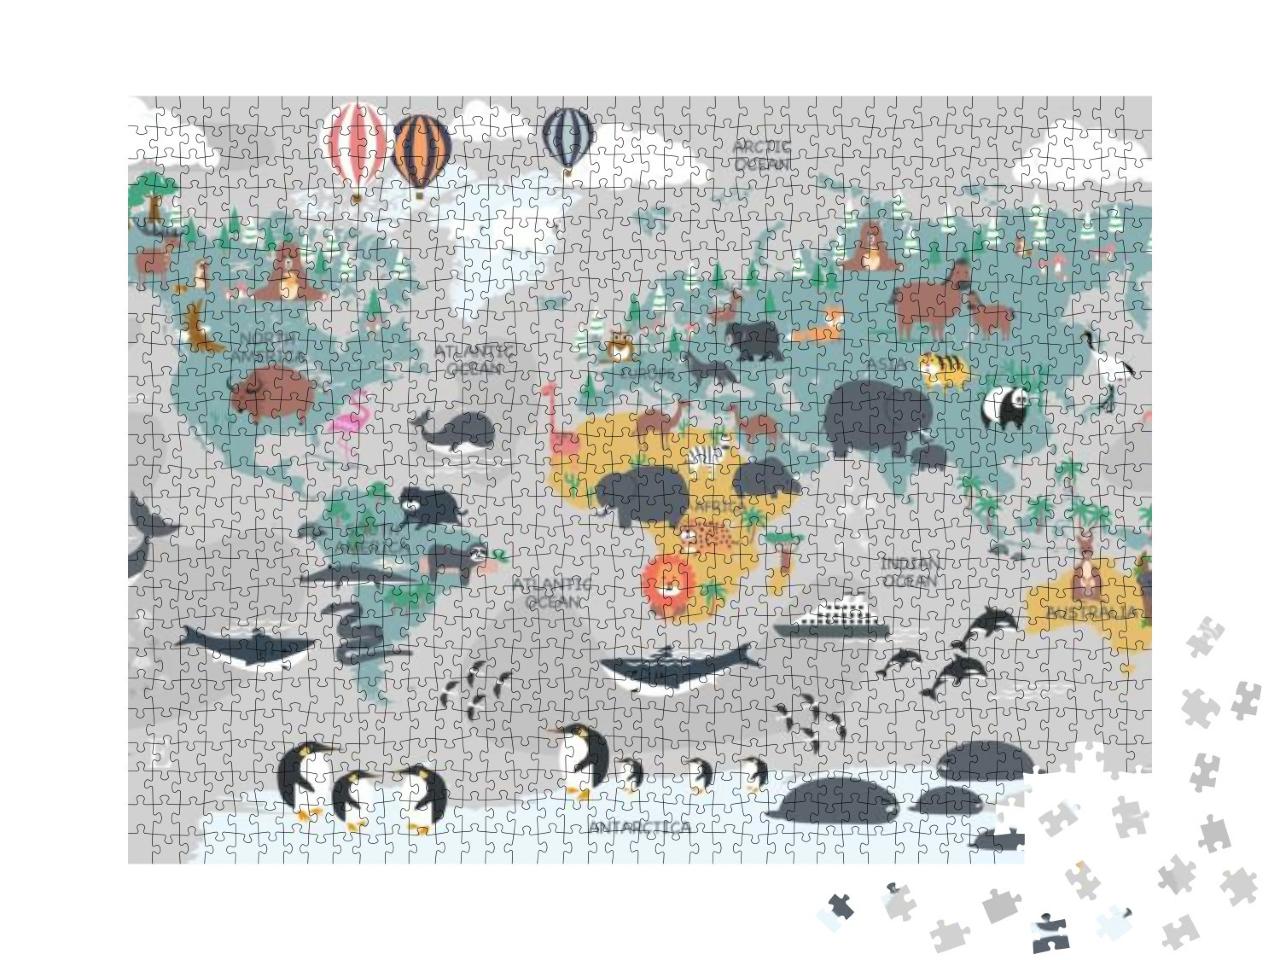 The World Map with Cartoon Animals for Kids, Nature, Disc... Jigsaw Puzzle with 1000 pieces